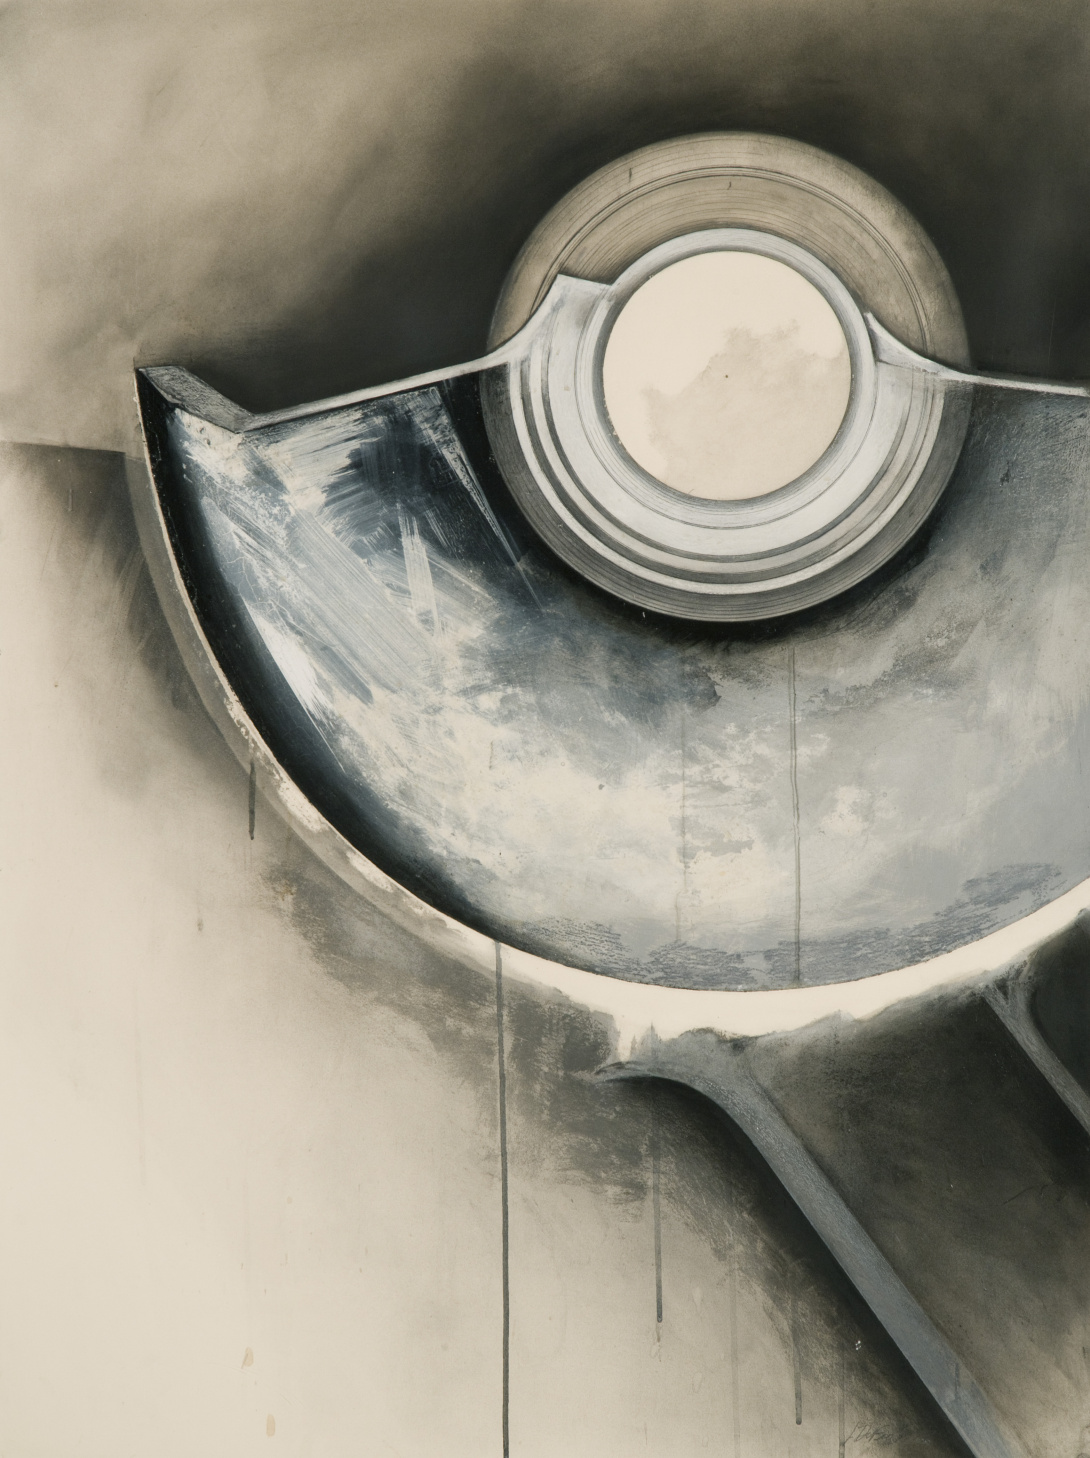 A painting in muted white and grey tones of what appears to be a broken rotary cutter. A handle emerges from 5 o'clock, attached to a half circle with a full circle at the center.